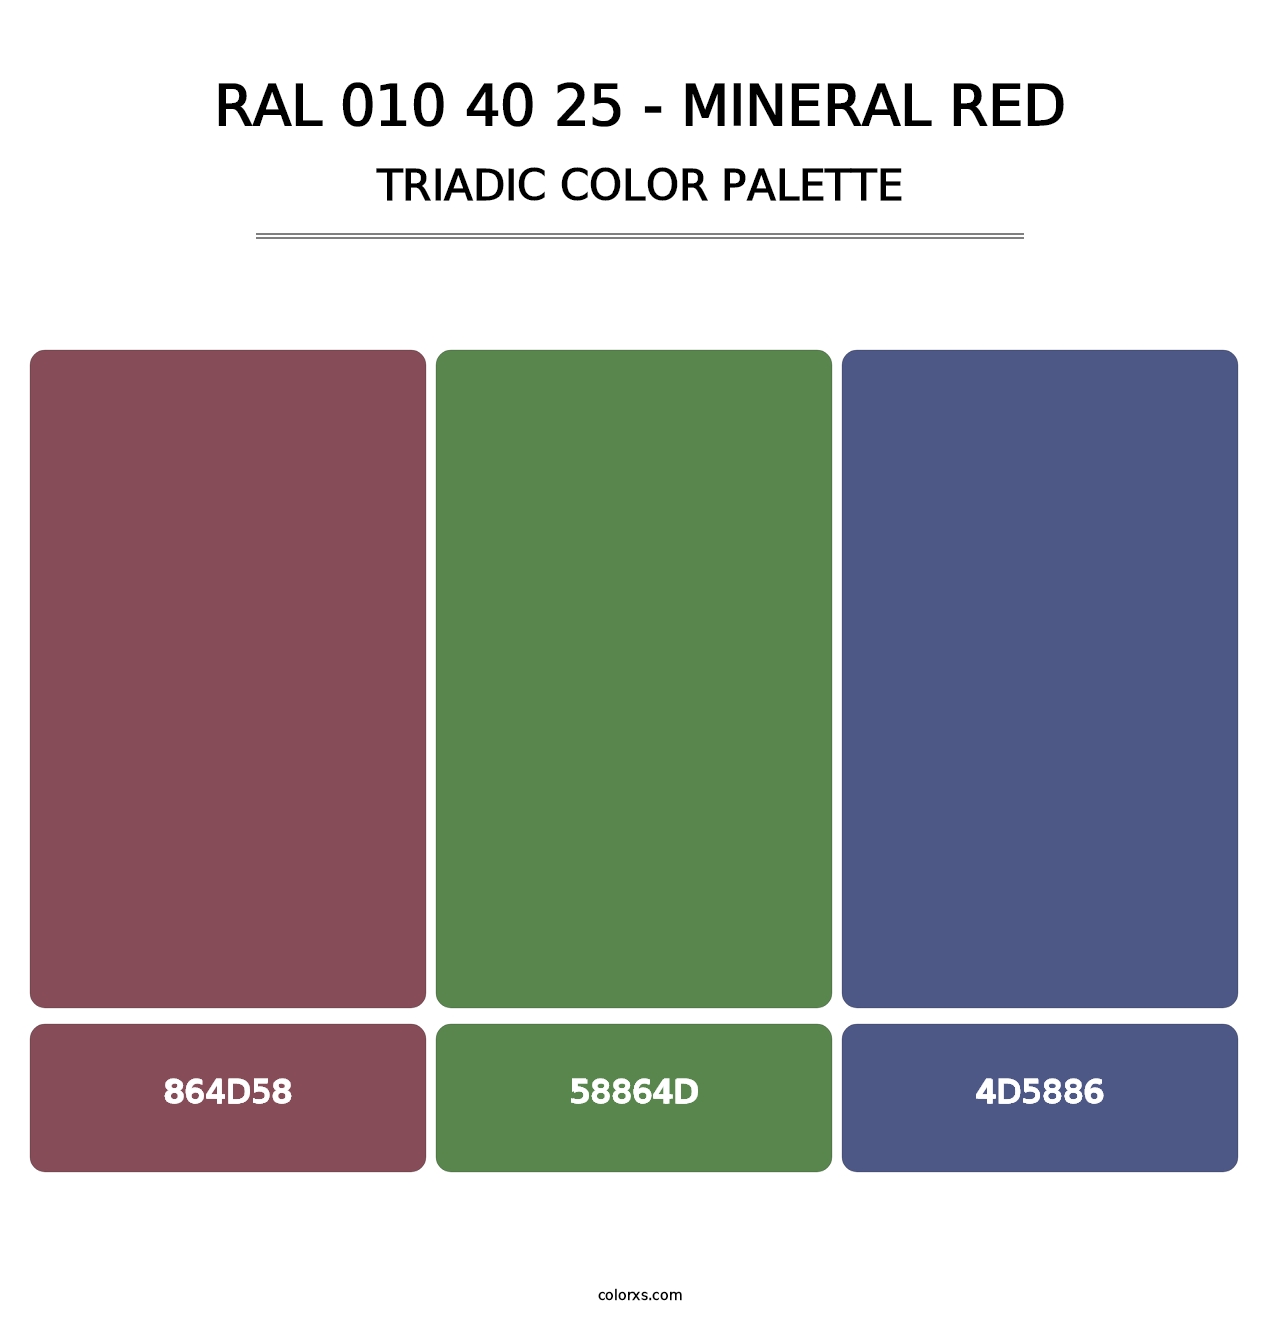 RAL 010 40 25 - Mineral Red - Triadic Color Palette